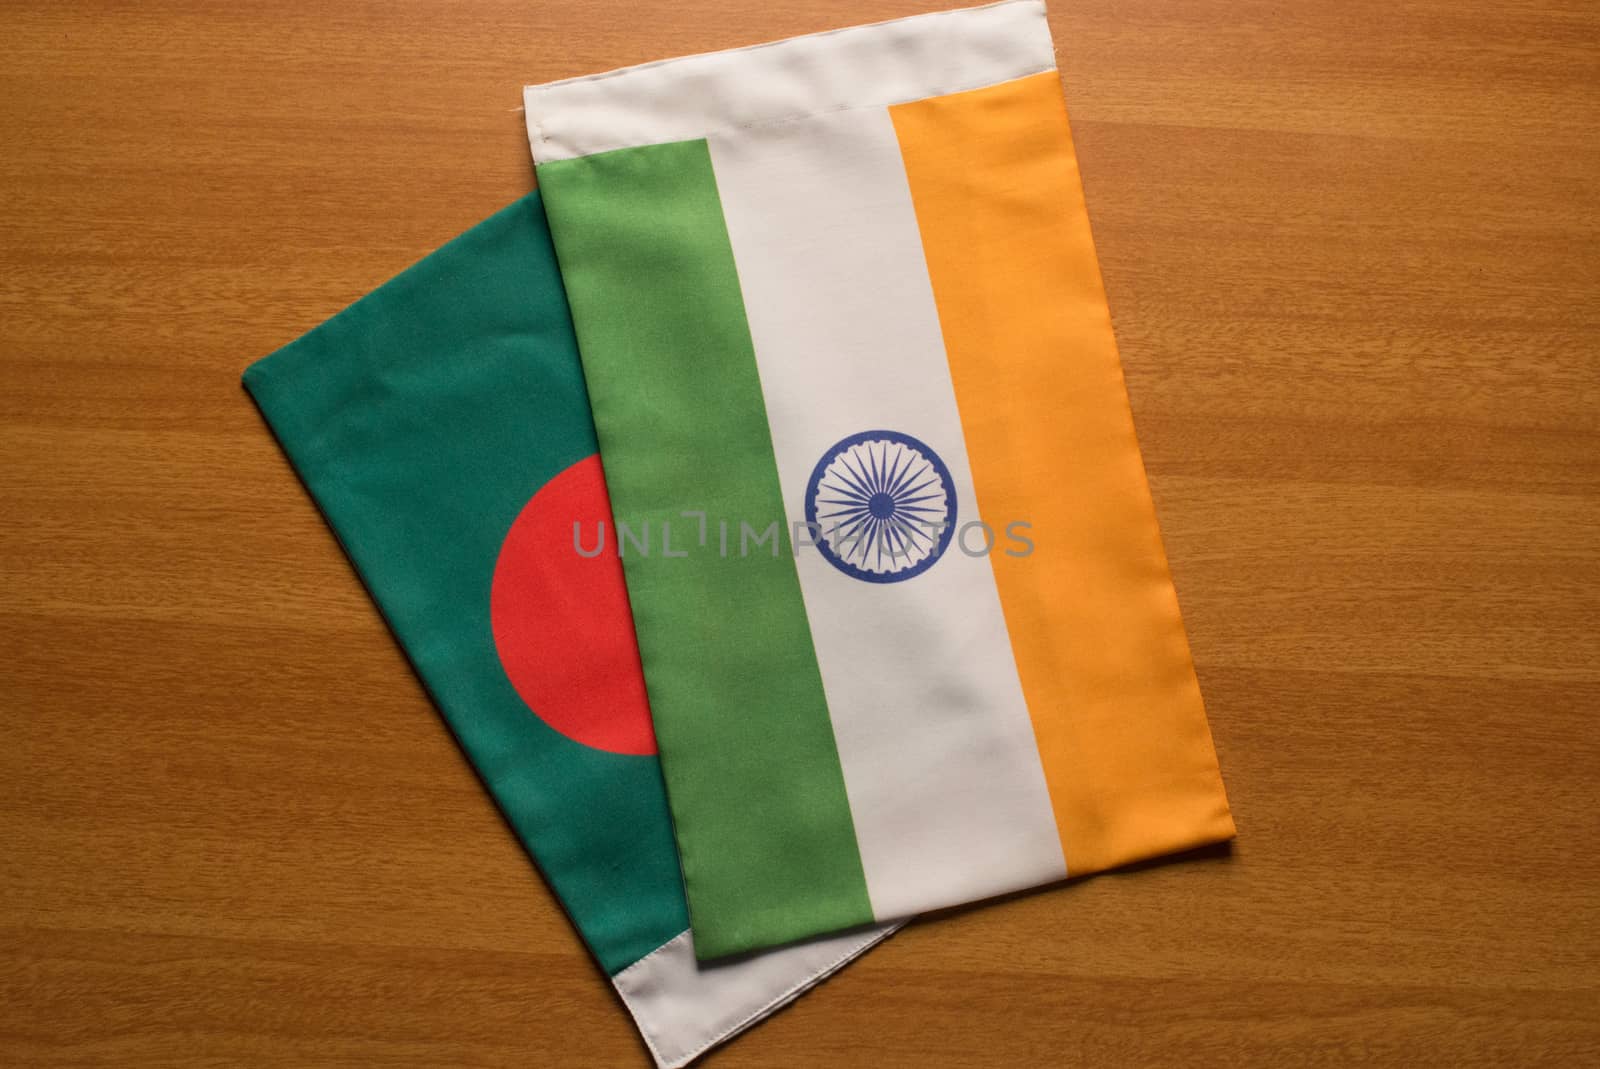 Bangladesh and Indian flags placed on table